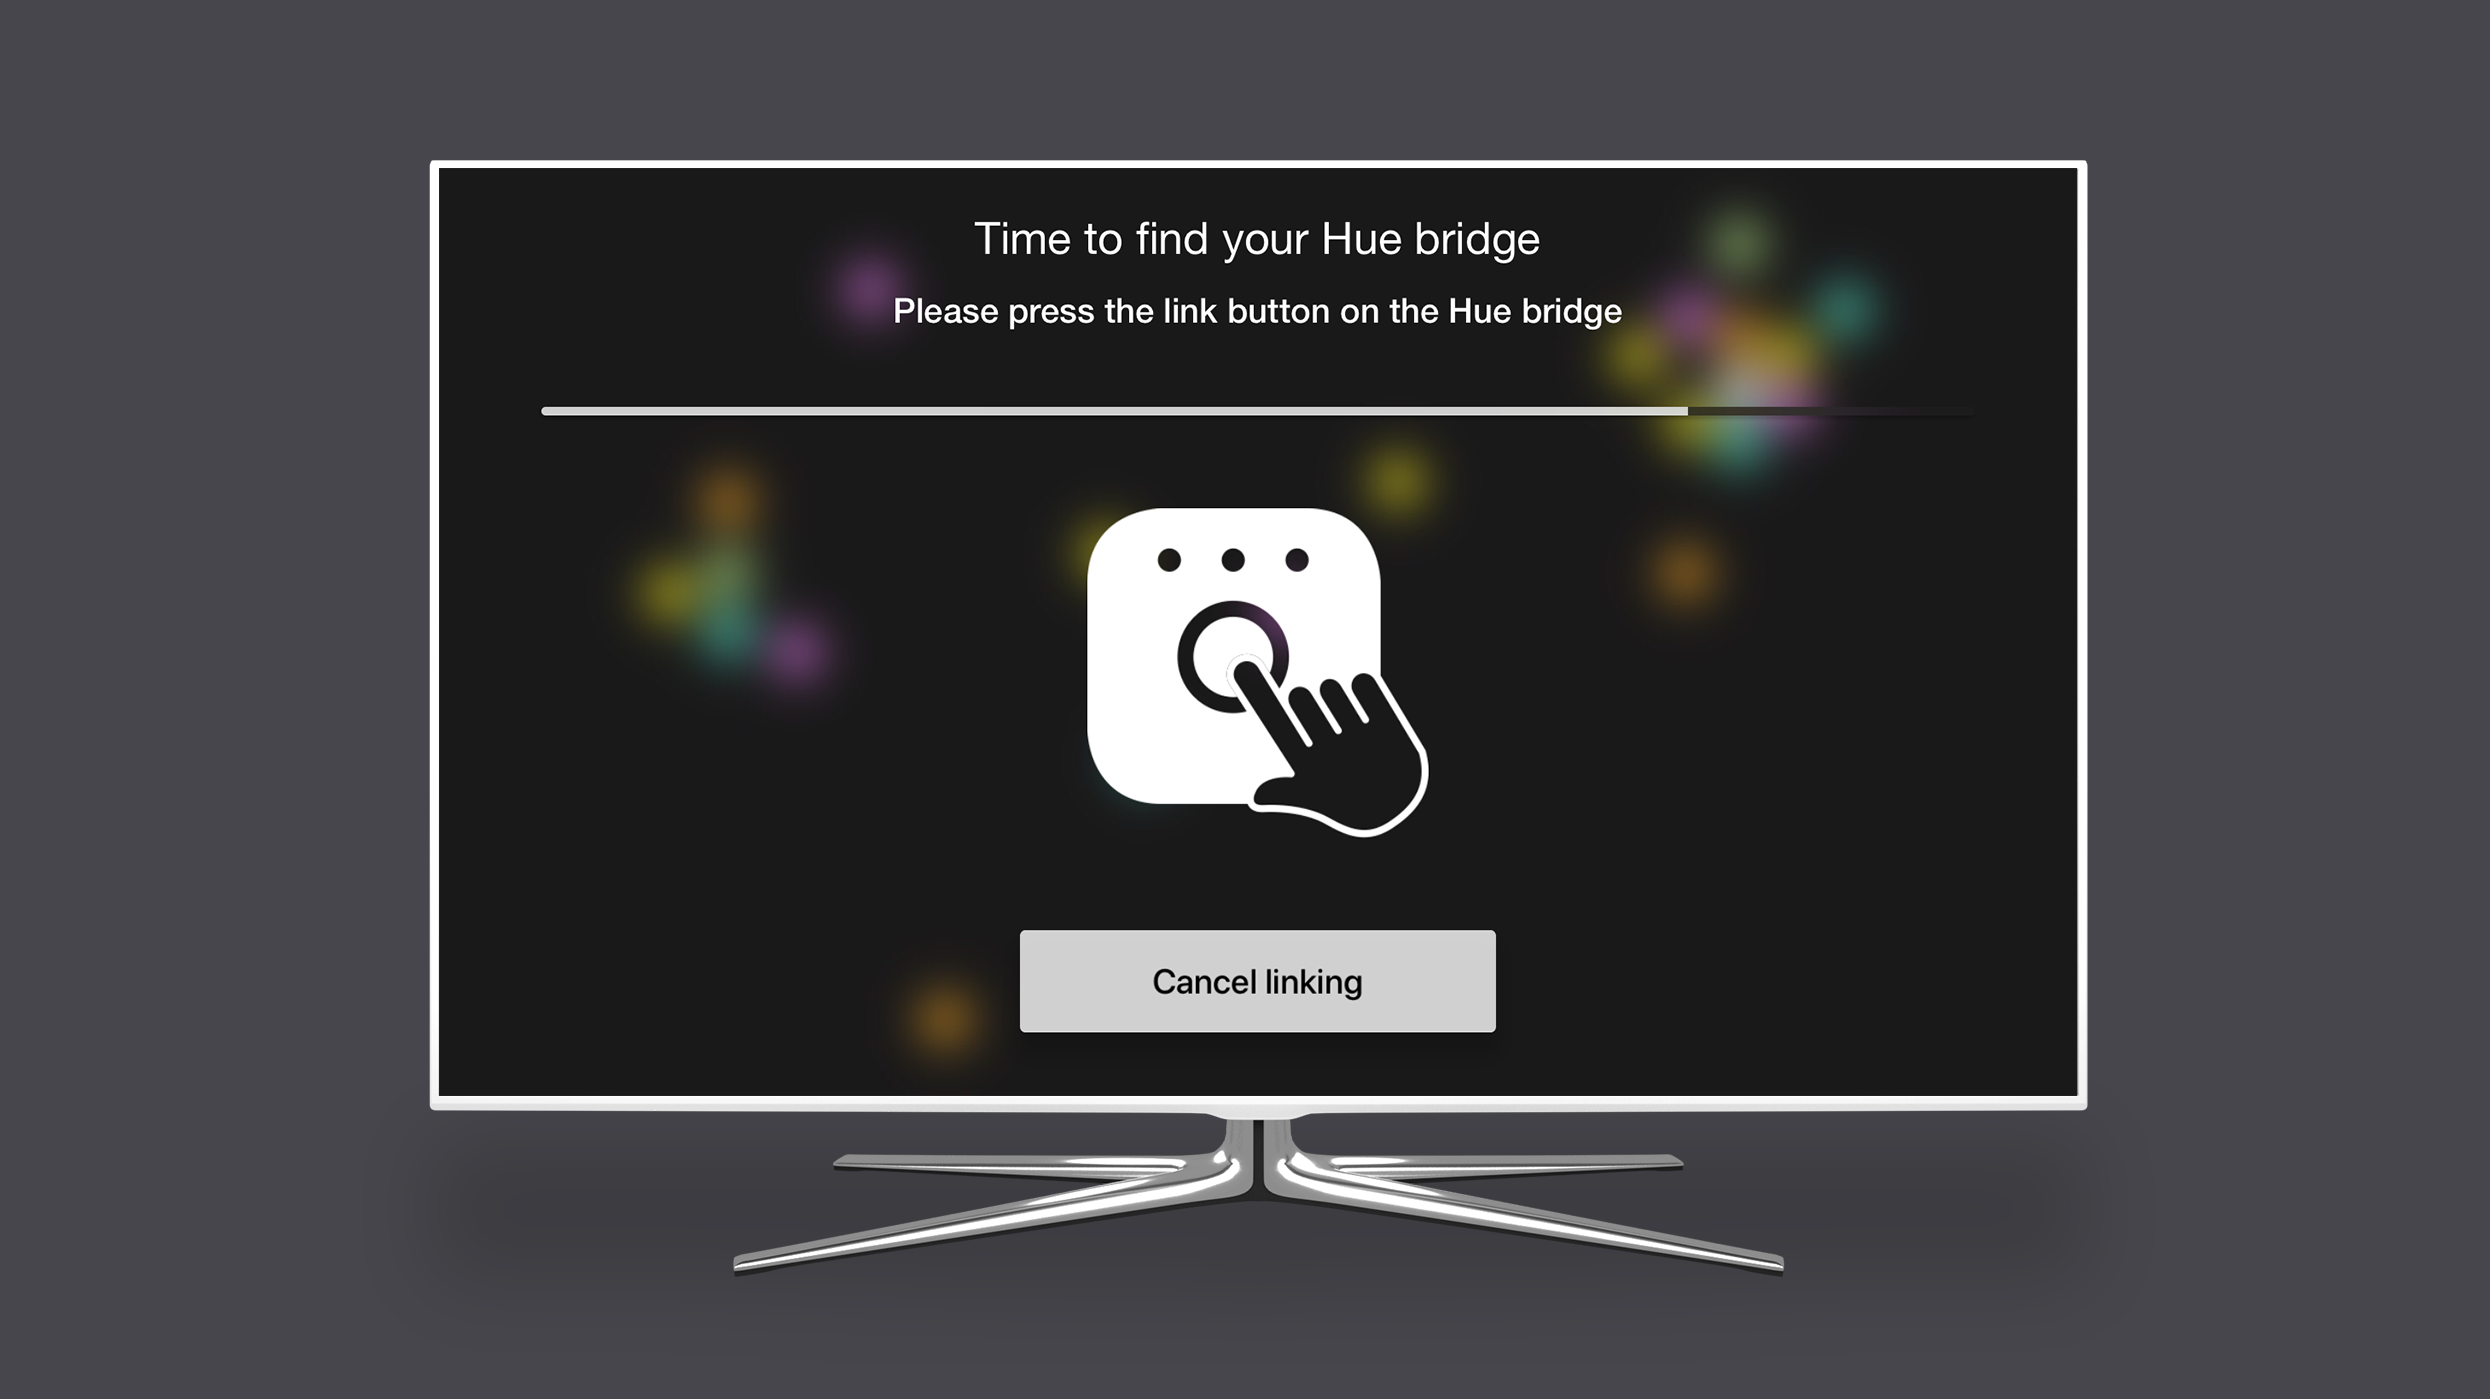 Review: Controlling Philips Hue Lighting on Apple TV With Hue TV